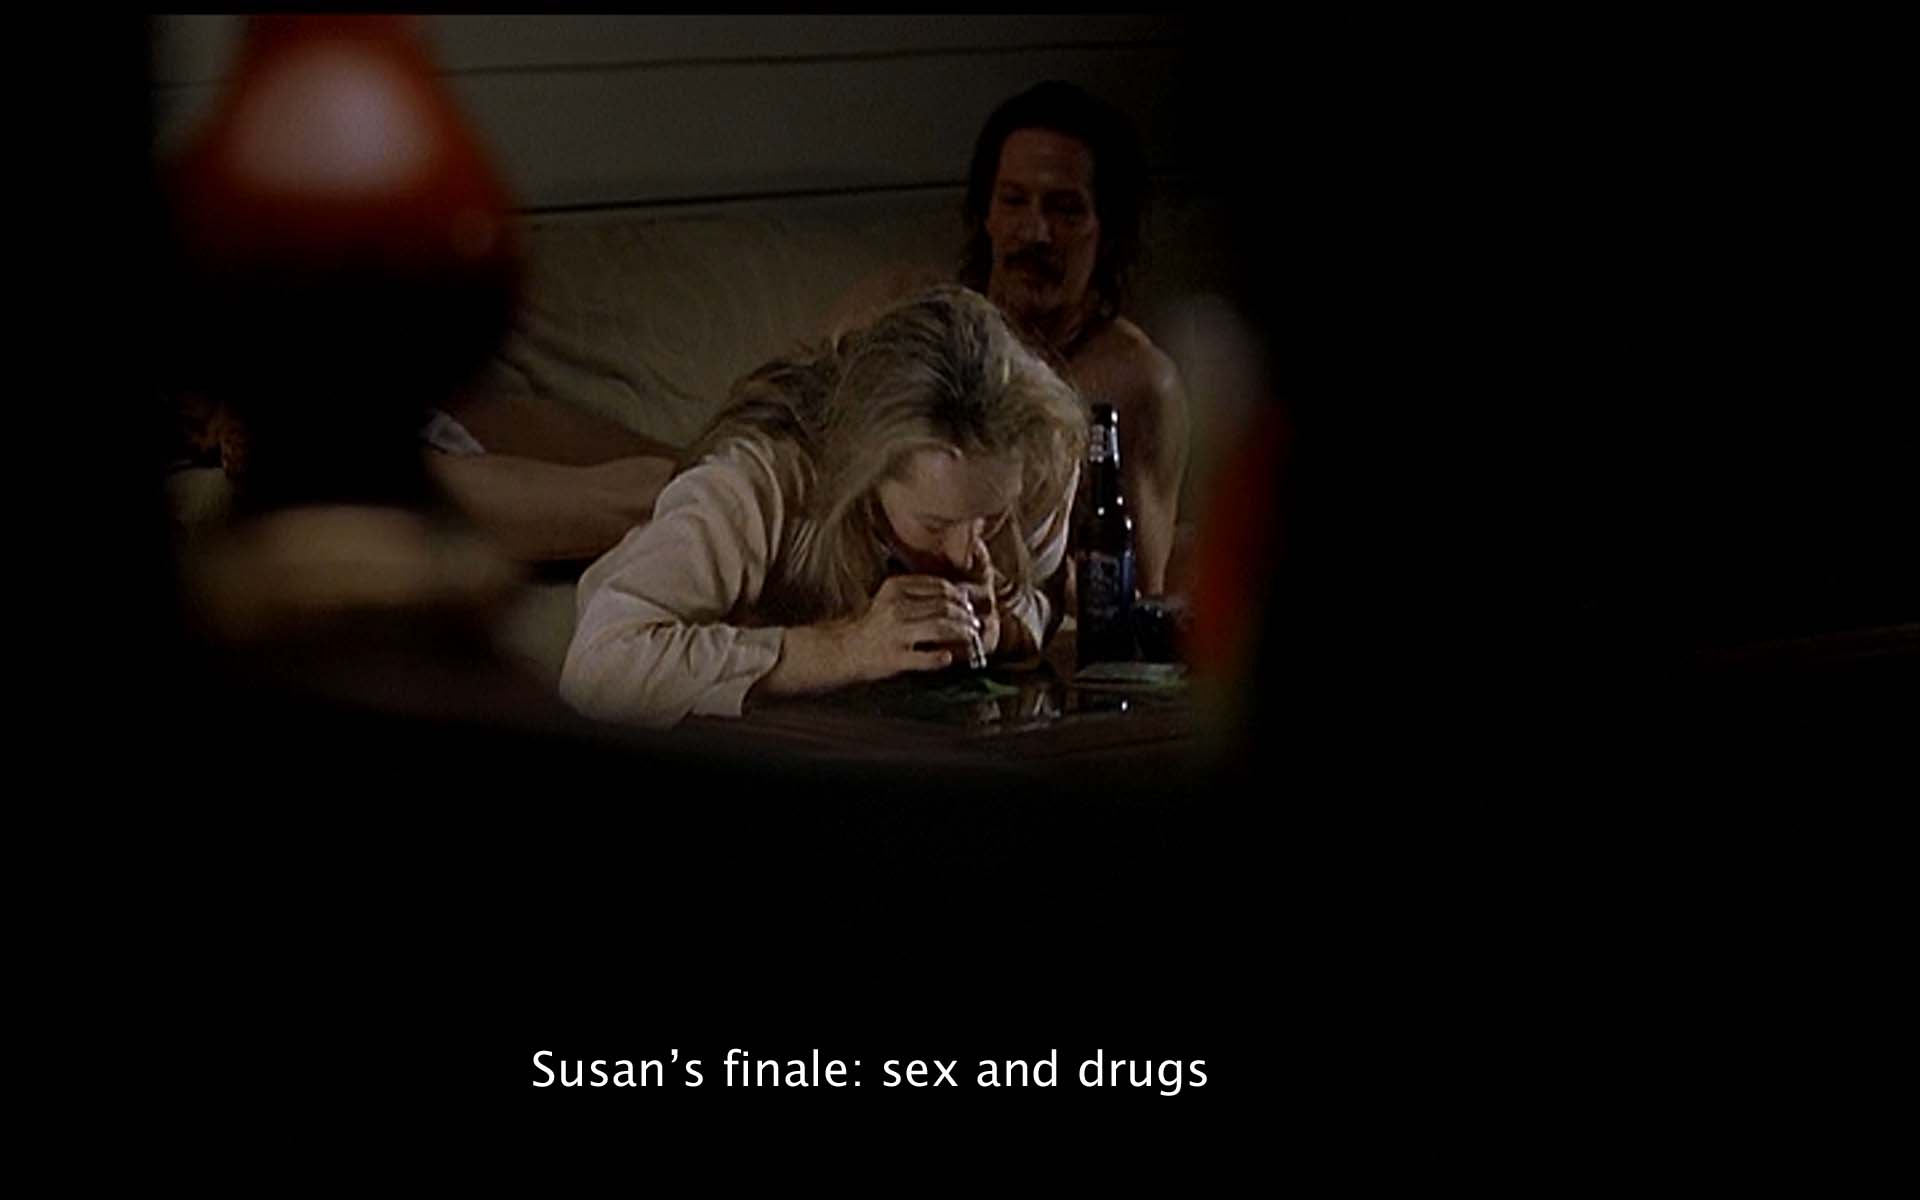 Susan's finale: sex and drugs